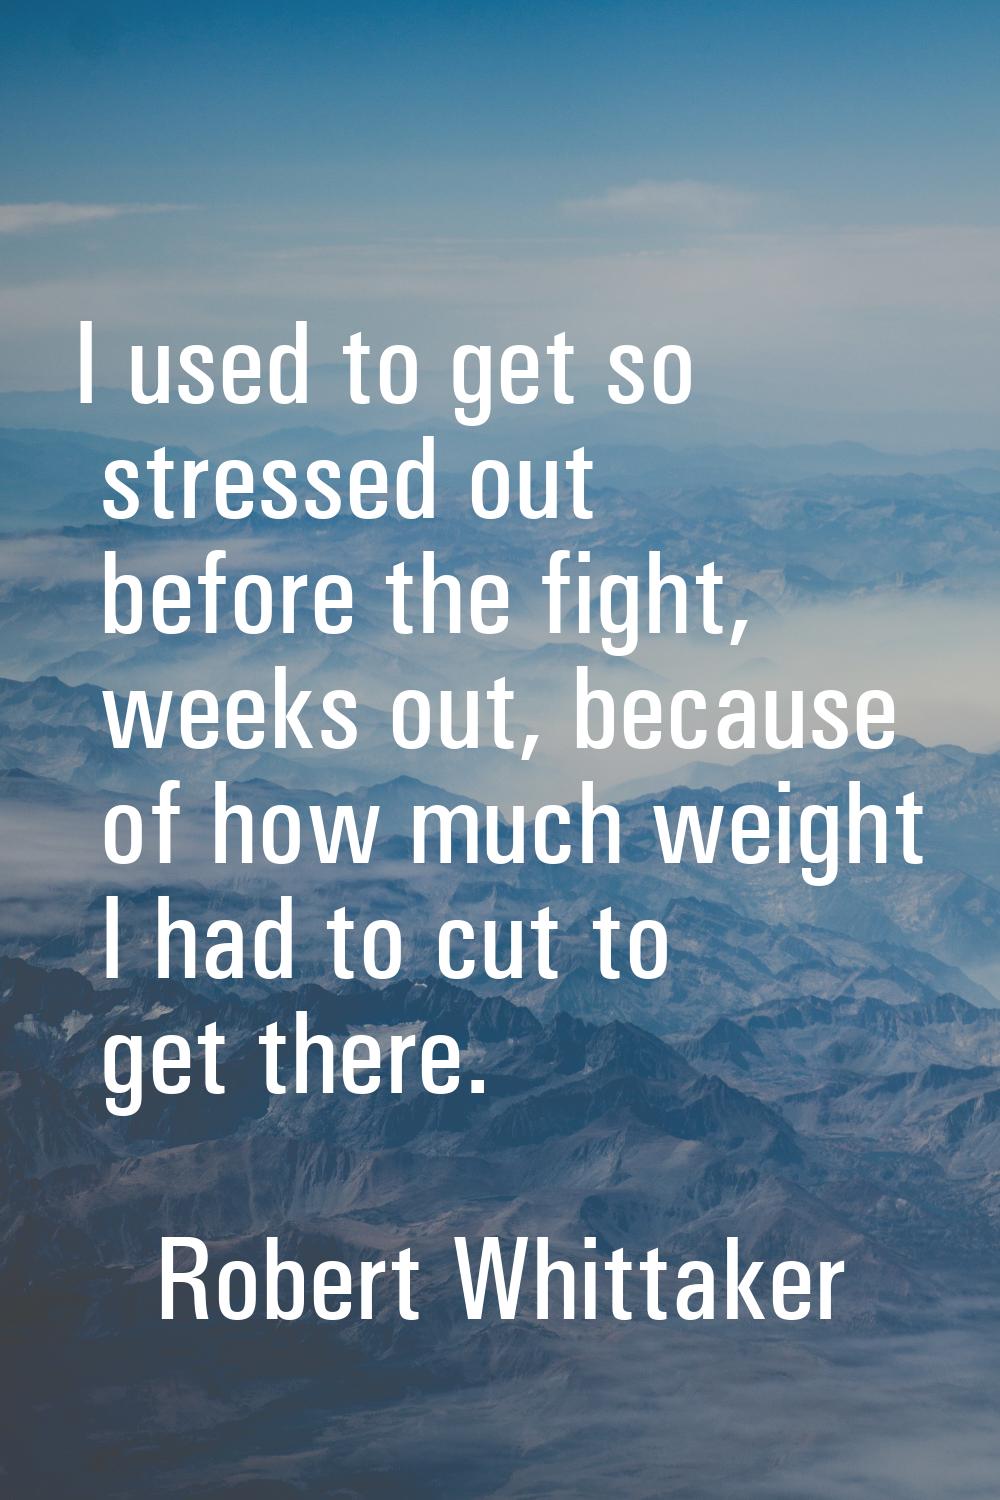 I used to get so stressed out before the fight, weeks out, because of how much weight I had to cut 